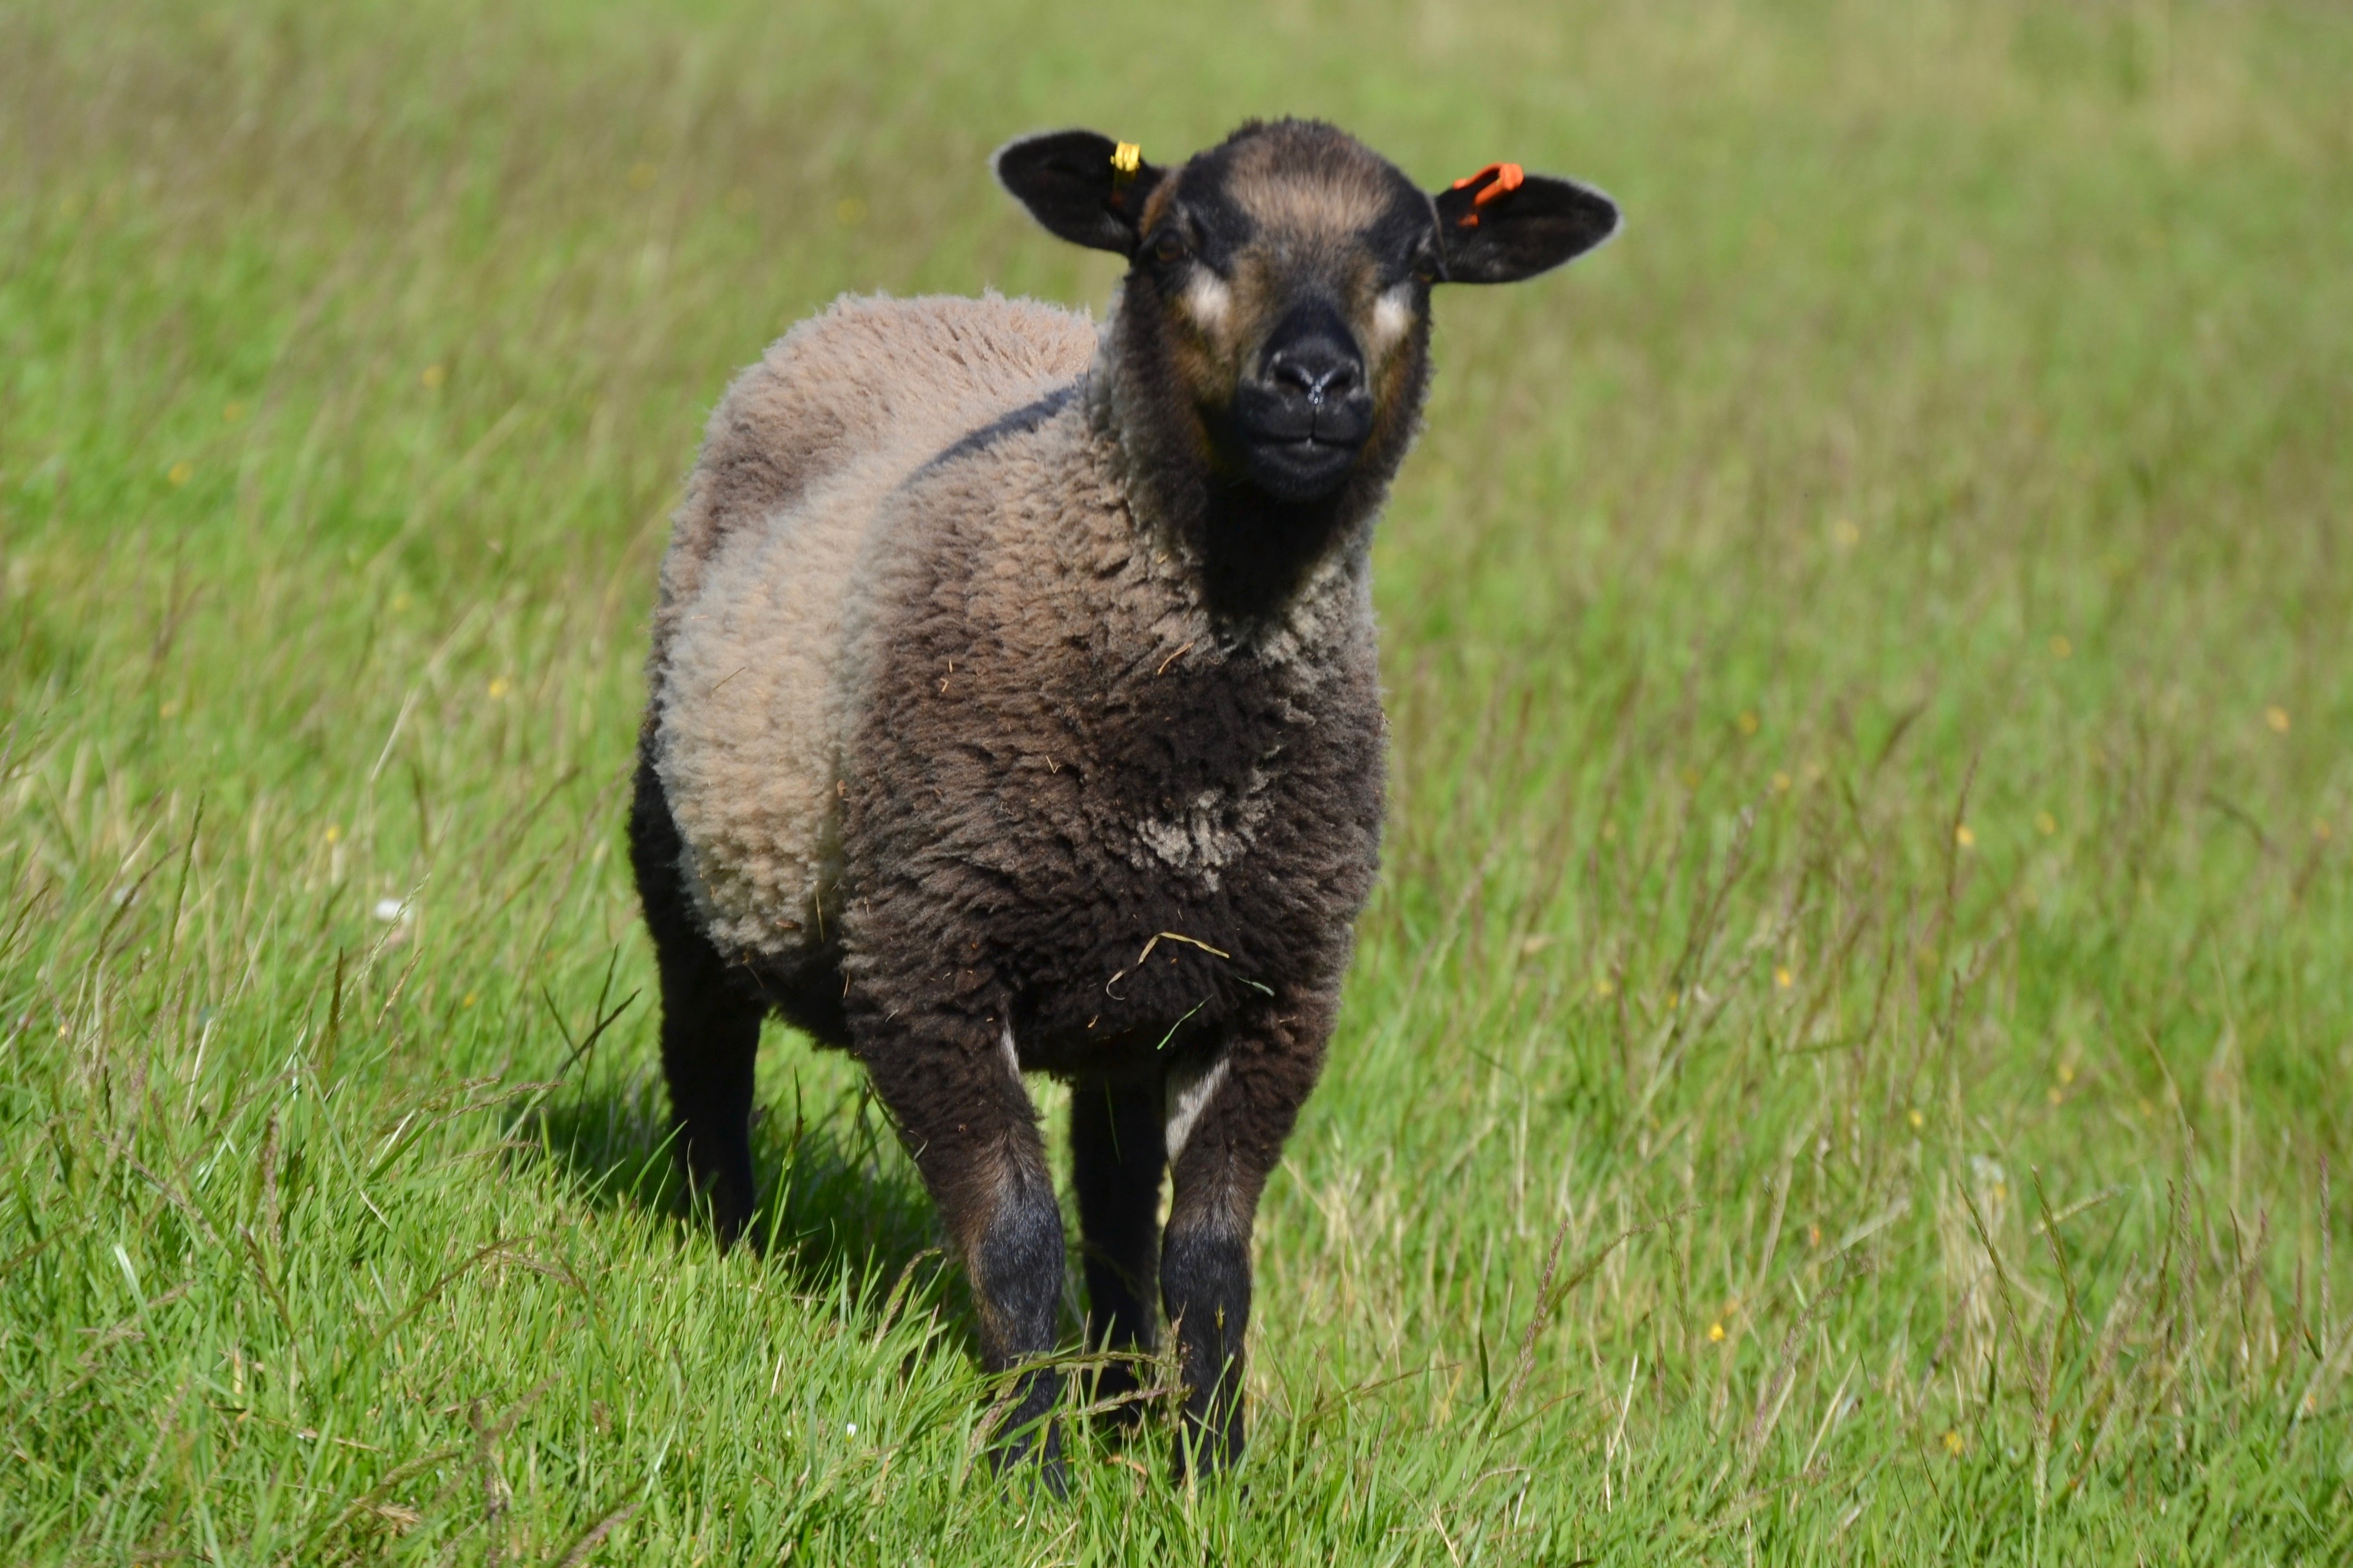 Hardicott Pedigree Shetlands, Shearling Ewes and Rams and Lambs for sale. image 1